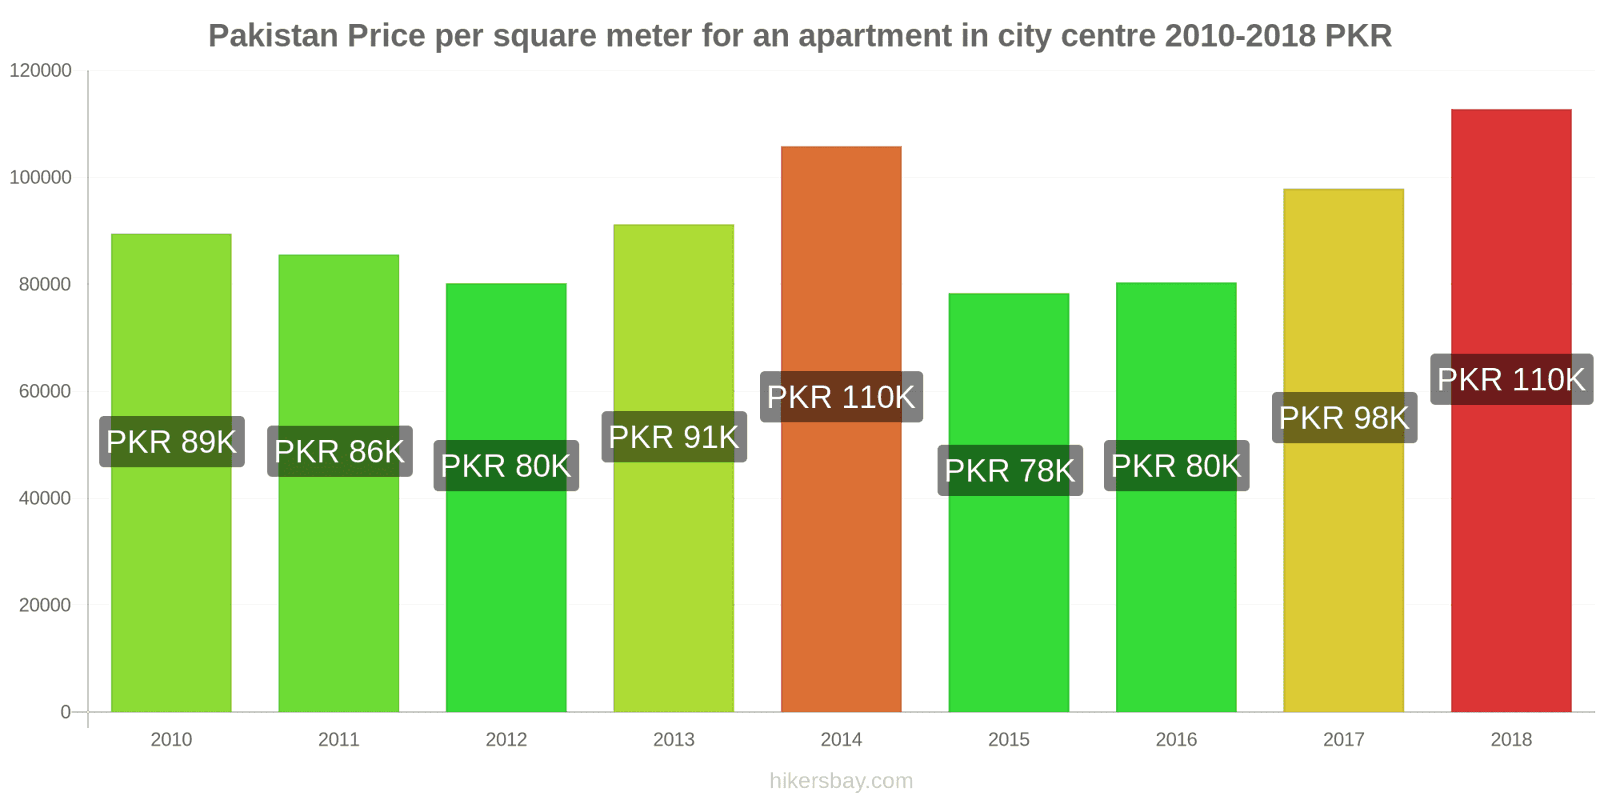 Pakistan price changes Price per square meter for an apartment in the city center hikersbay.com